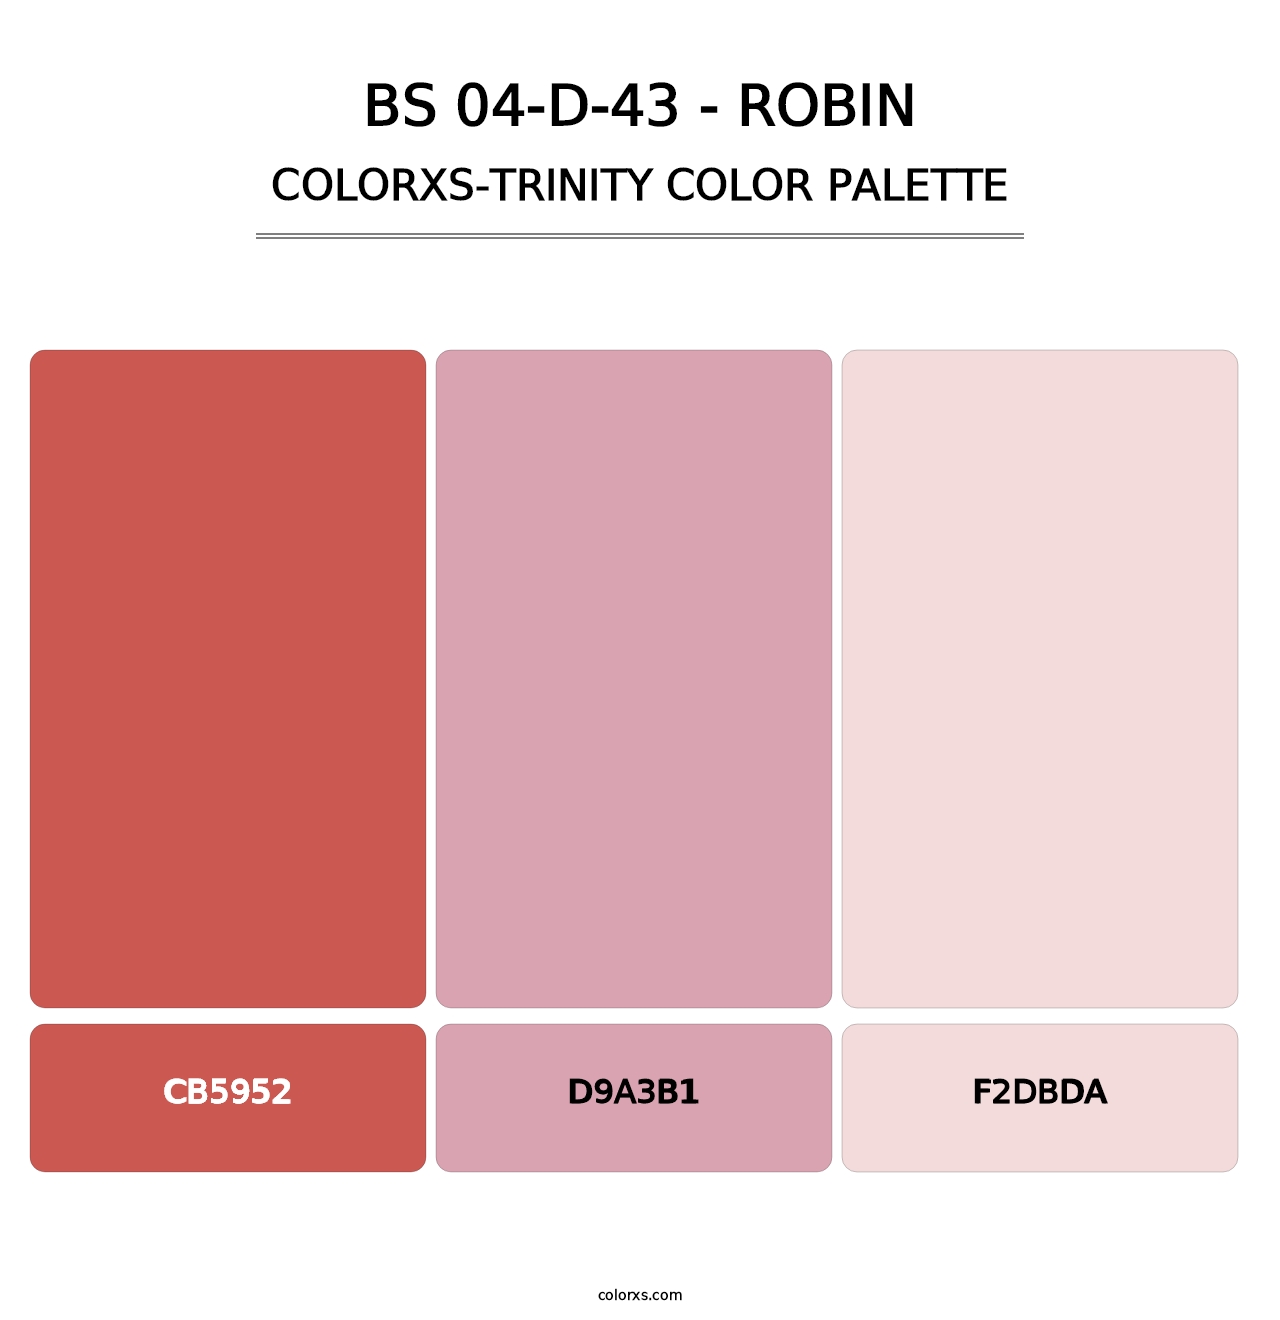 BS 04-D-43 - Robin - Colorxs Trinity Palette